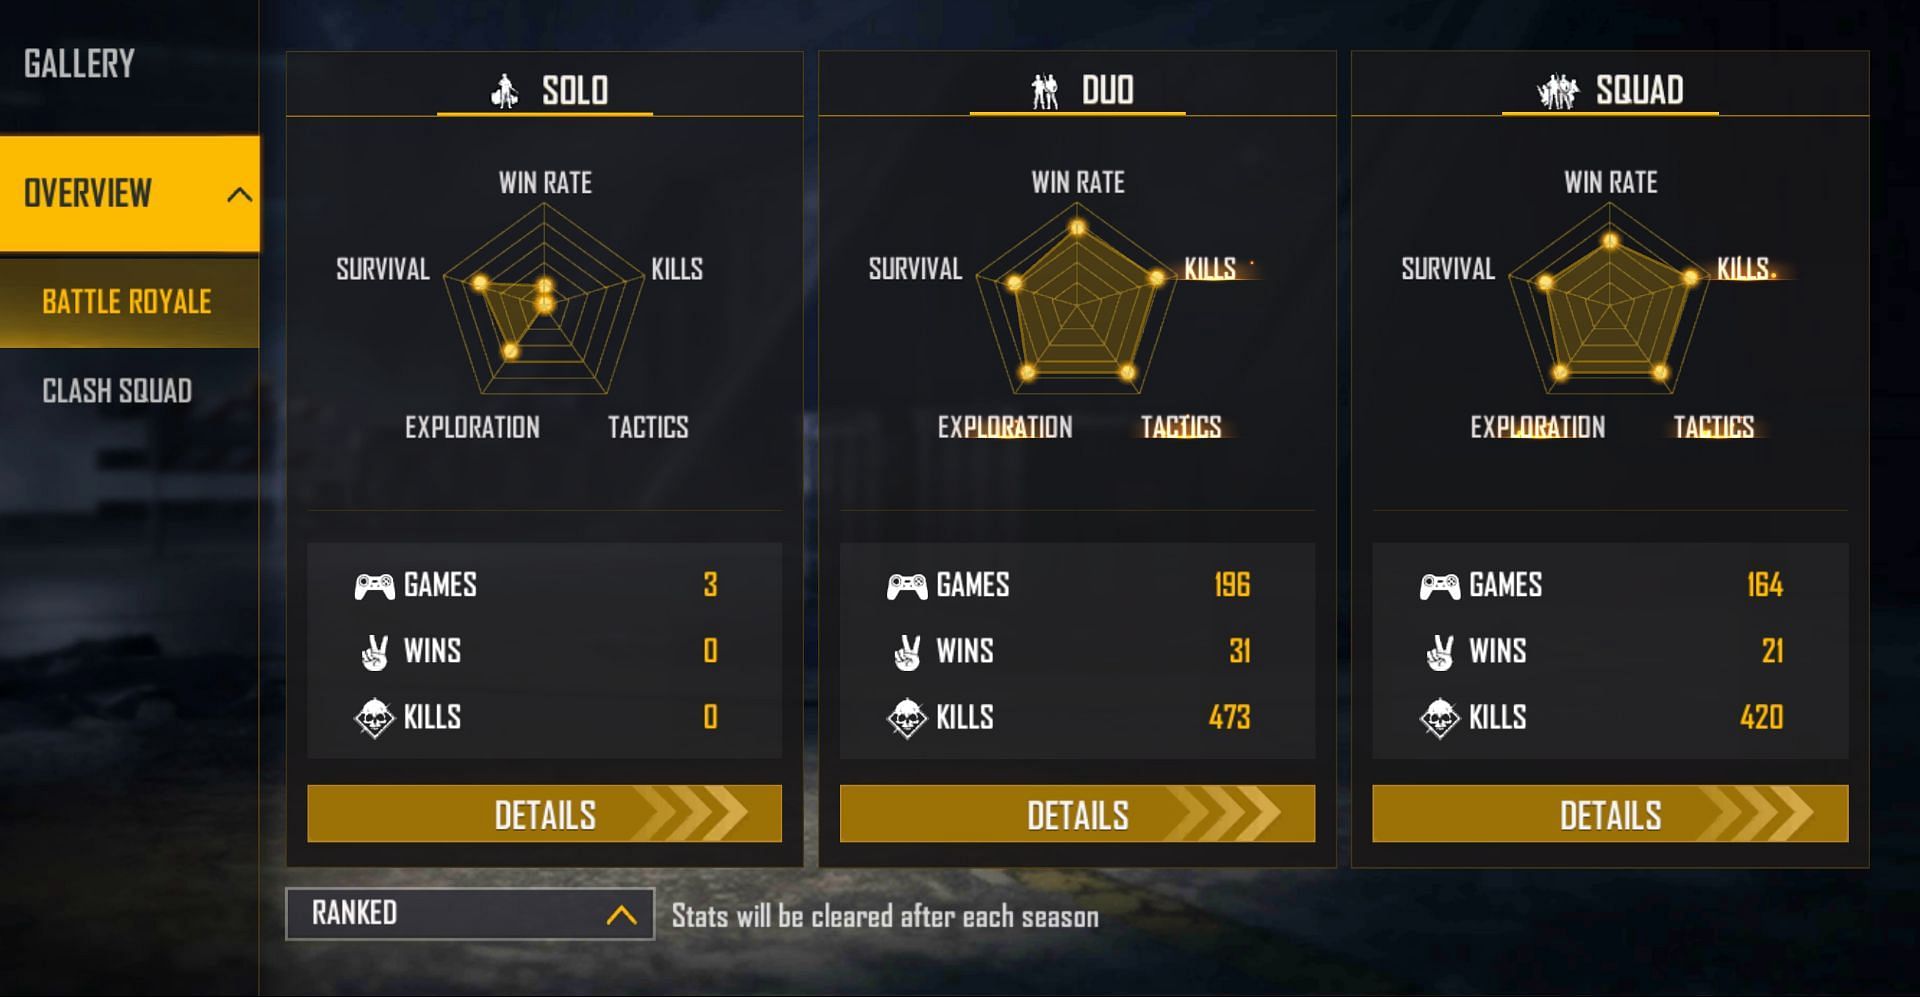 PK Gamers has not won solo match (Image via Free Fire)